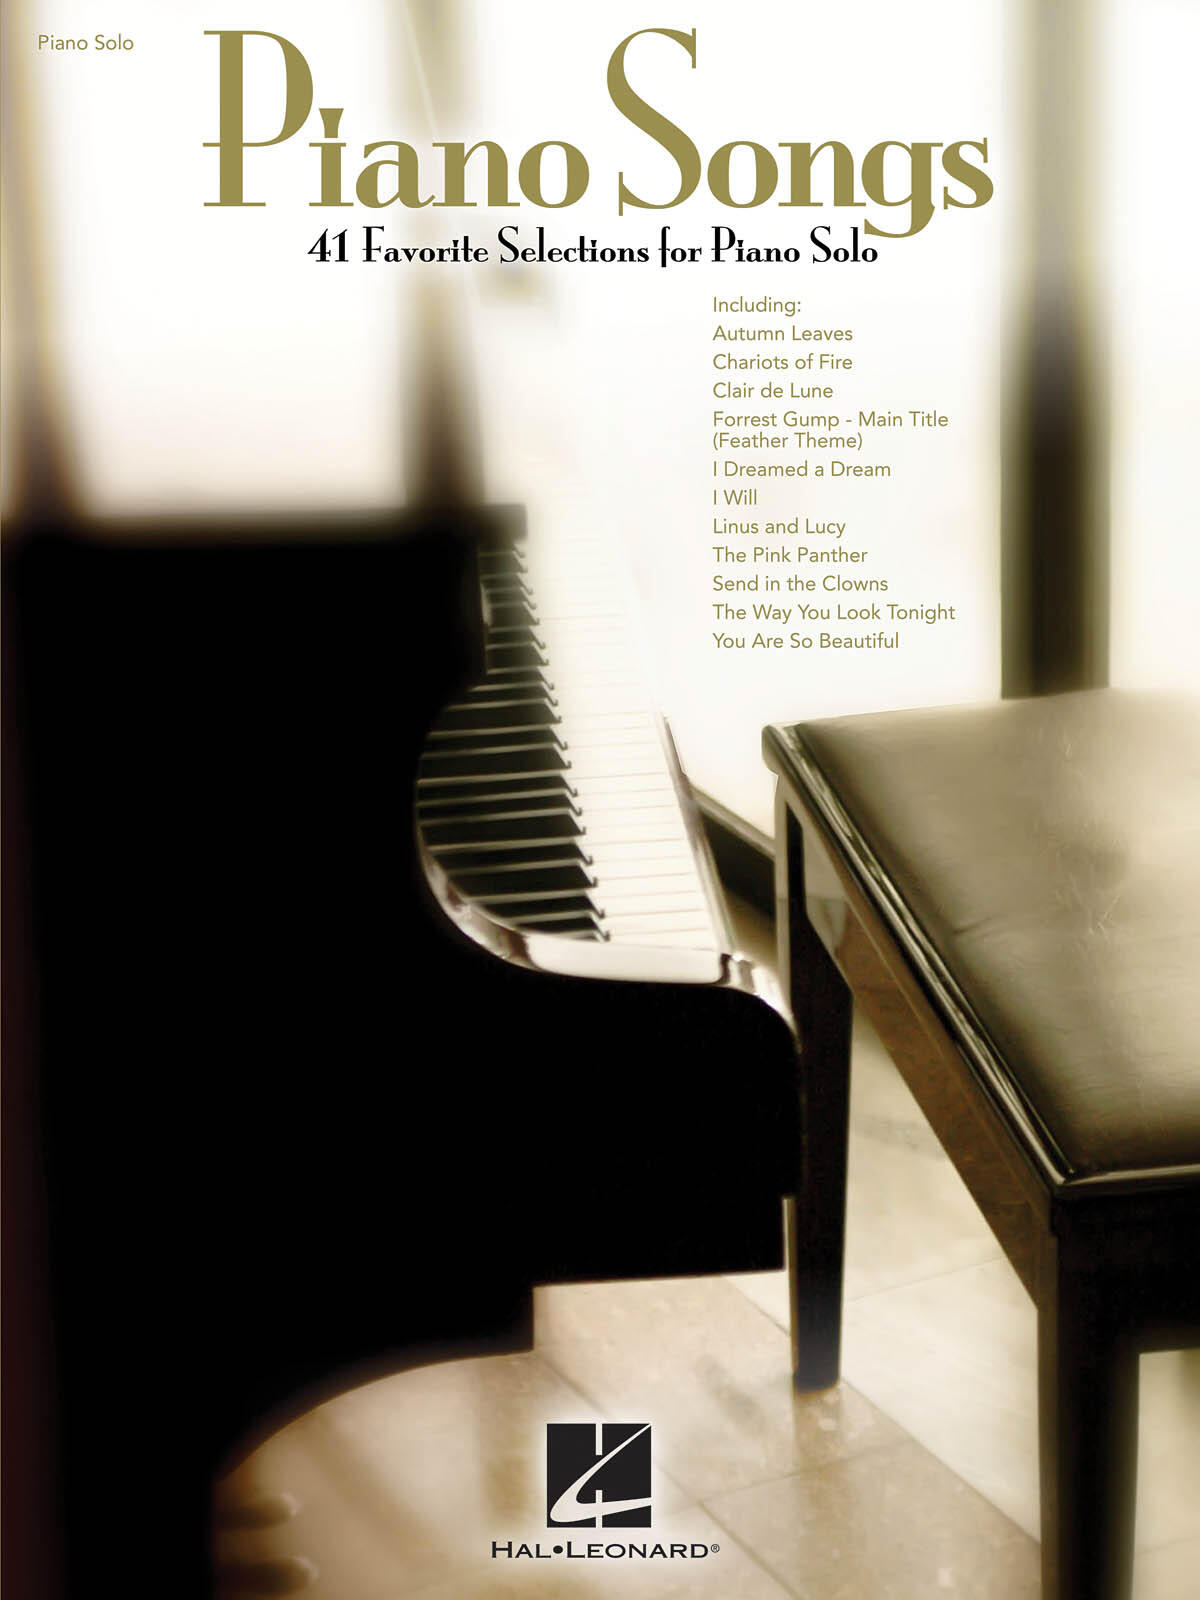 Hal Leonard Piano Songs 41 Favorite Selections for Piano Solo : photo 1